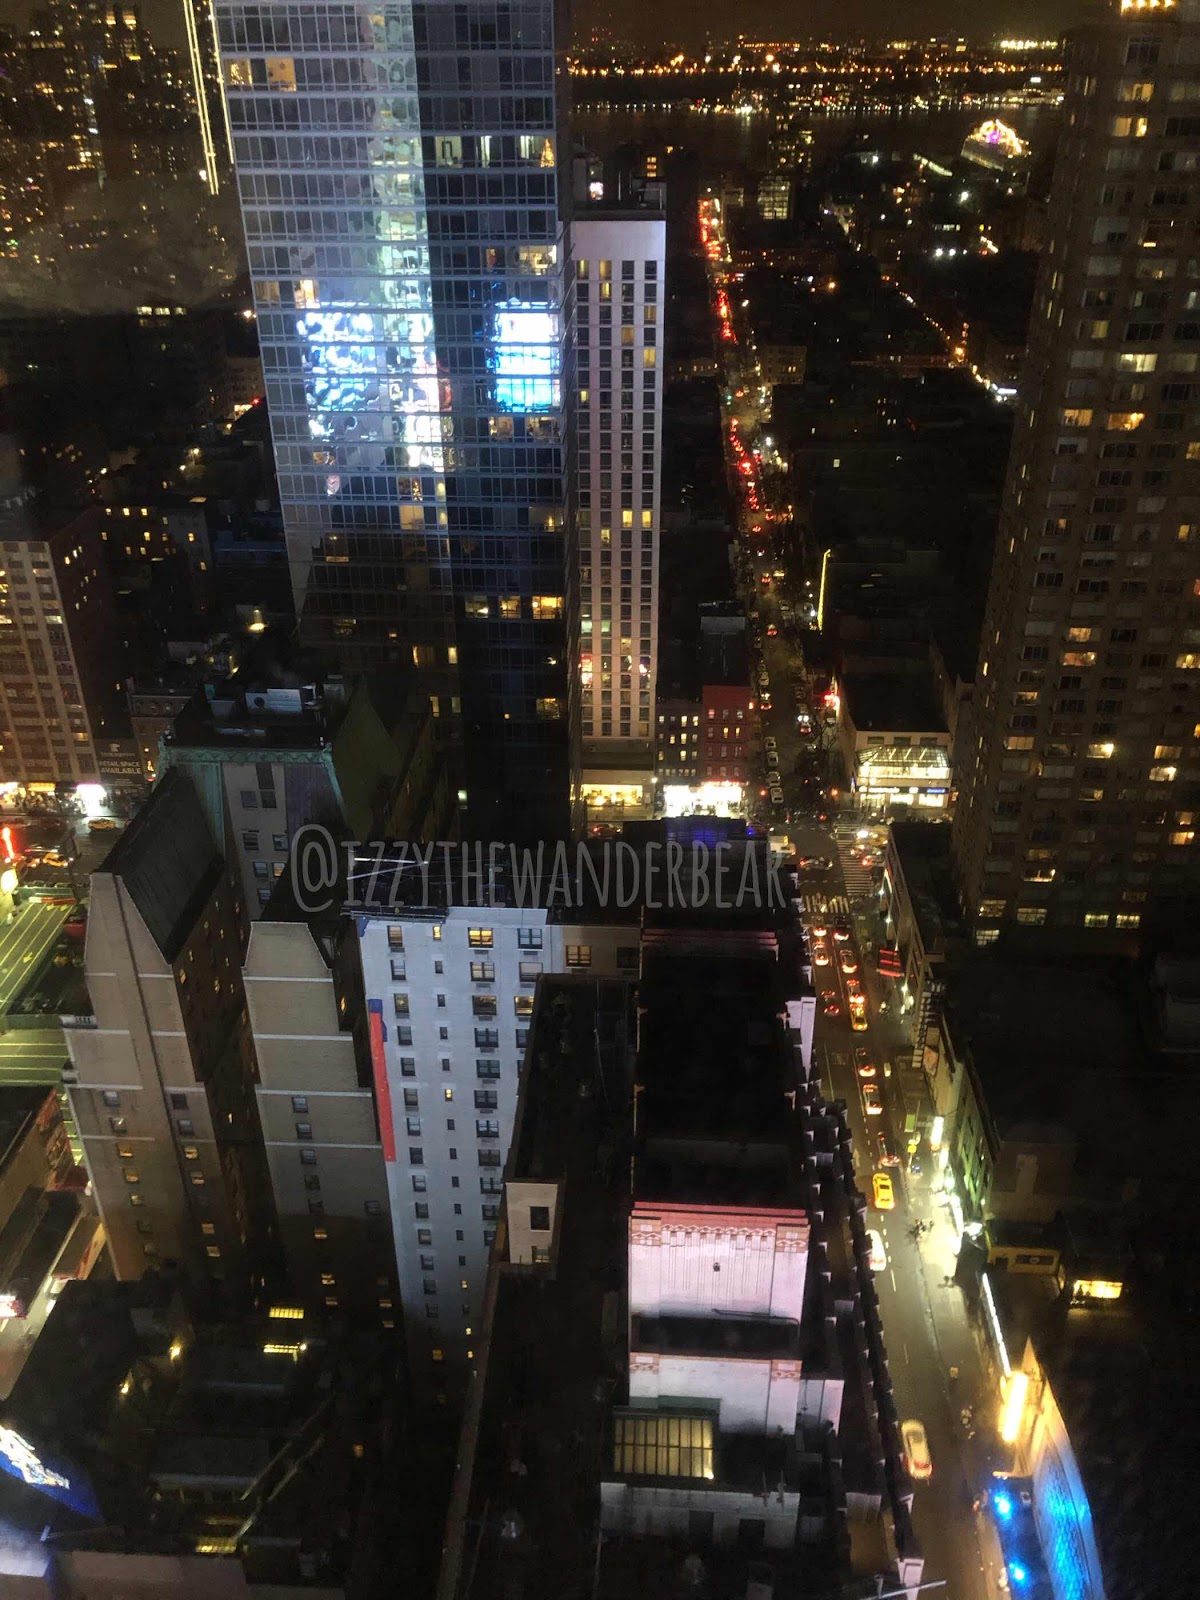 ITWB: The view from our hotel room, W hotel Times Square New York